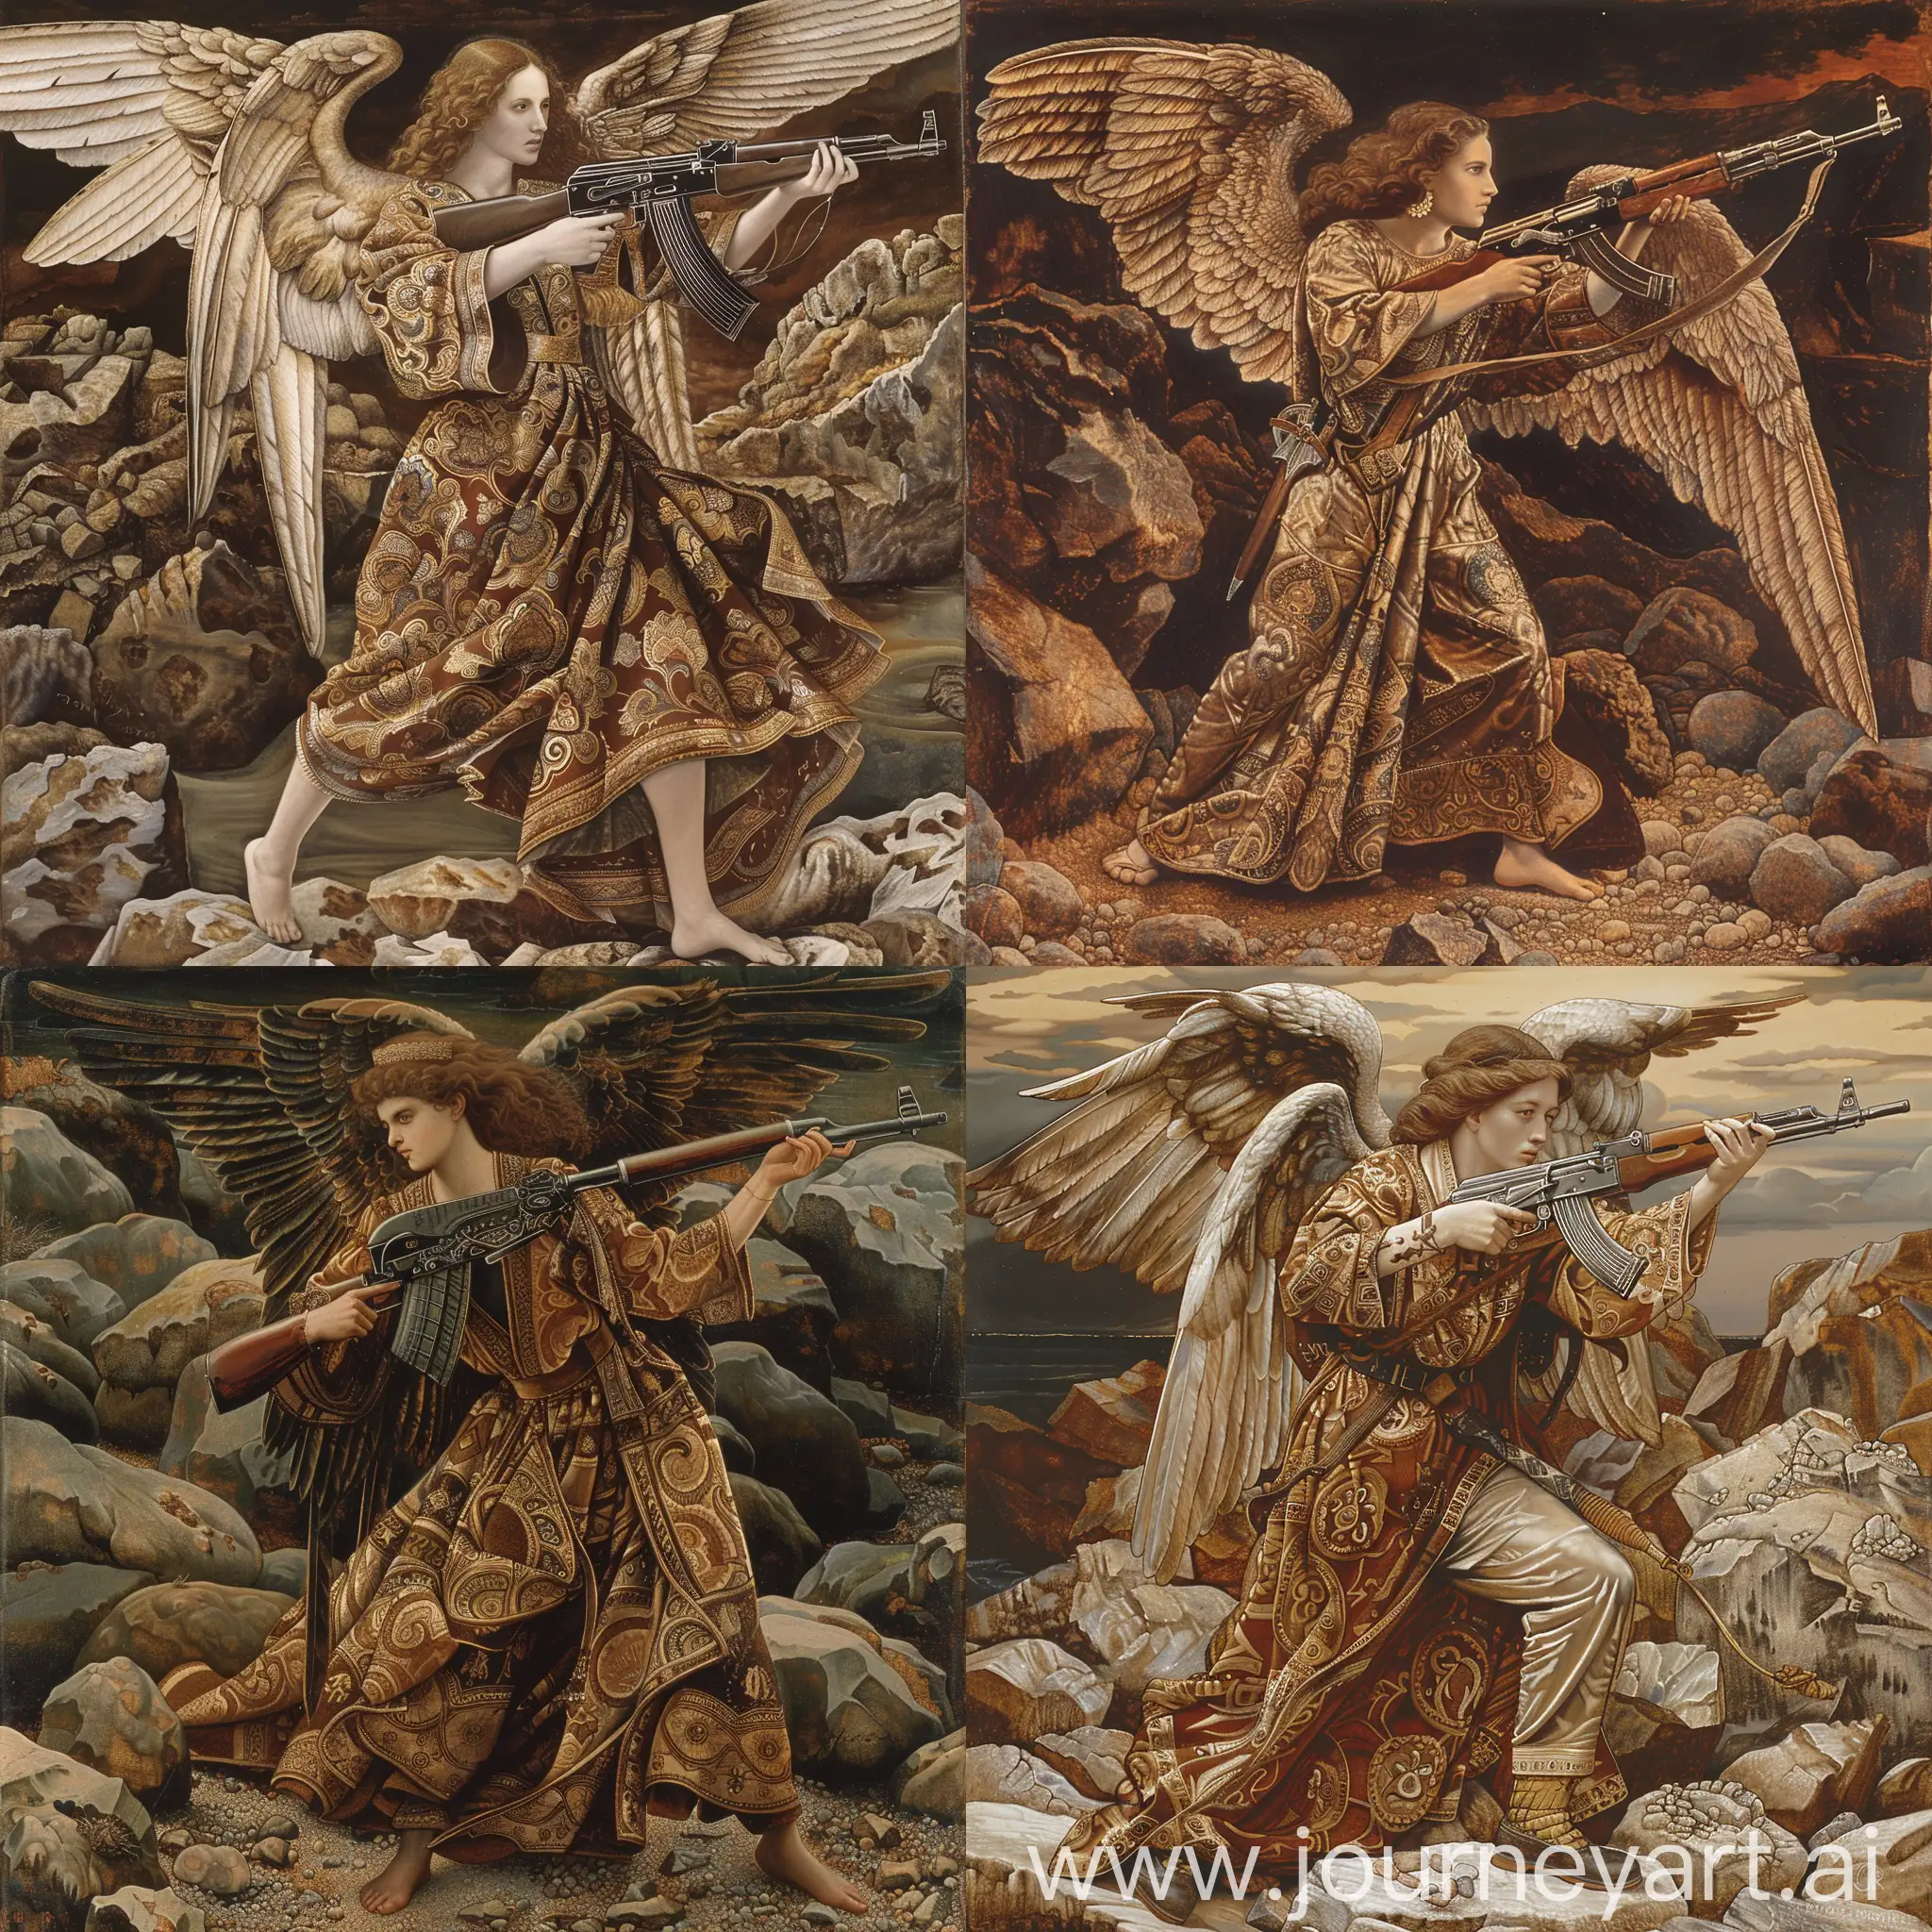 Ethereal-Angel-Warrior-with-AK47-Exquisite-Silk-Robes-and-Earth-Tones